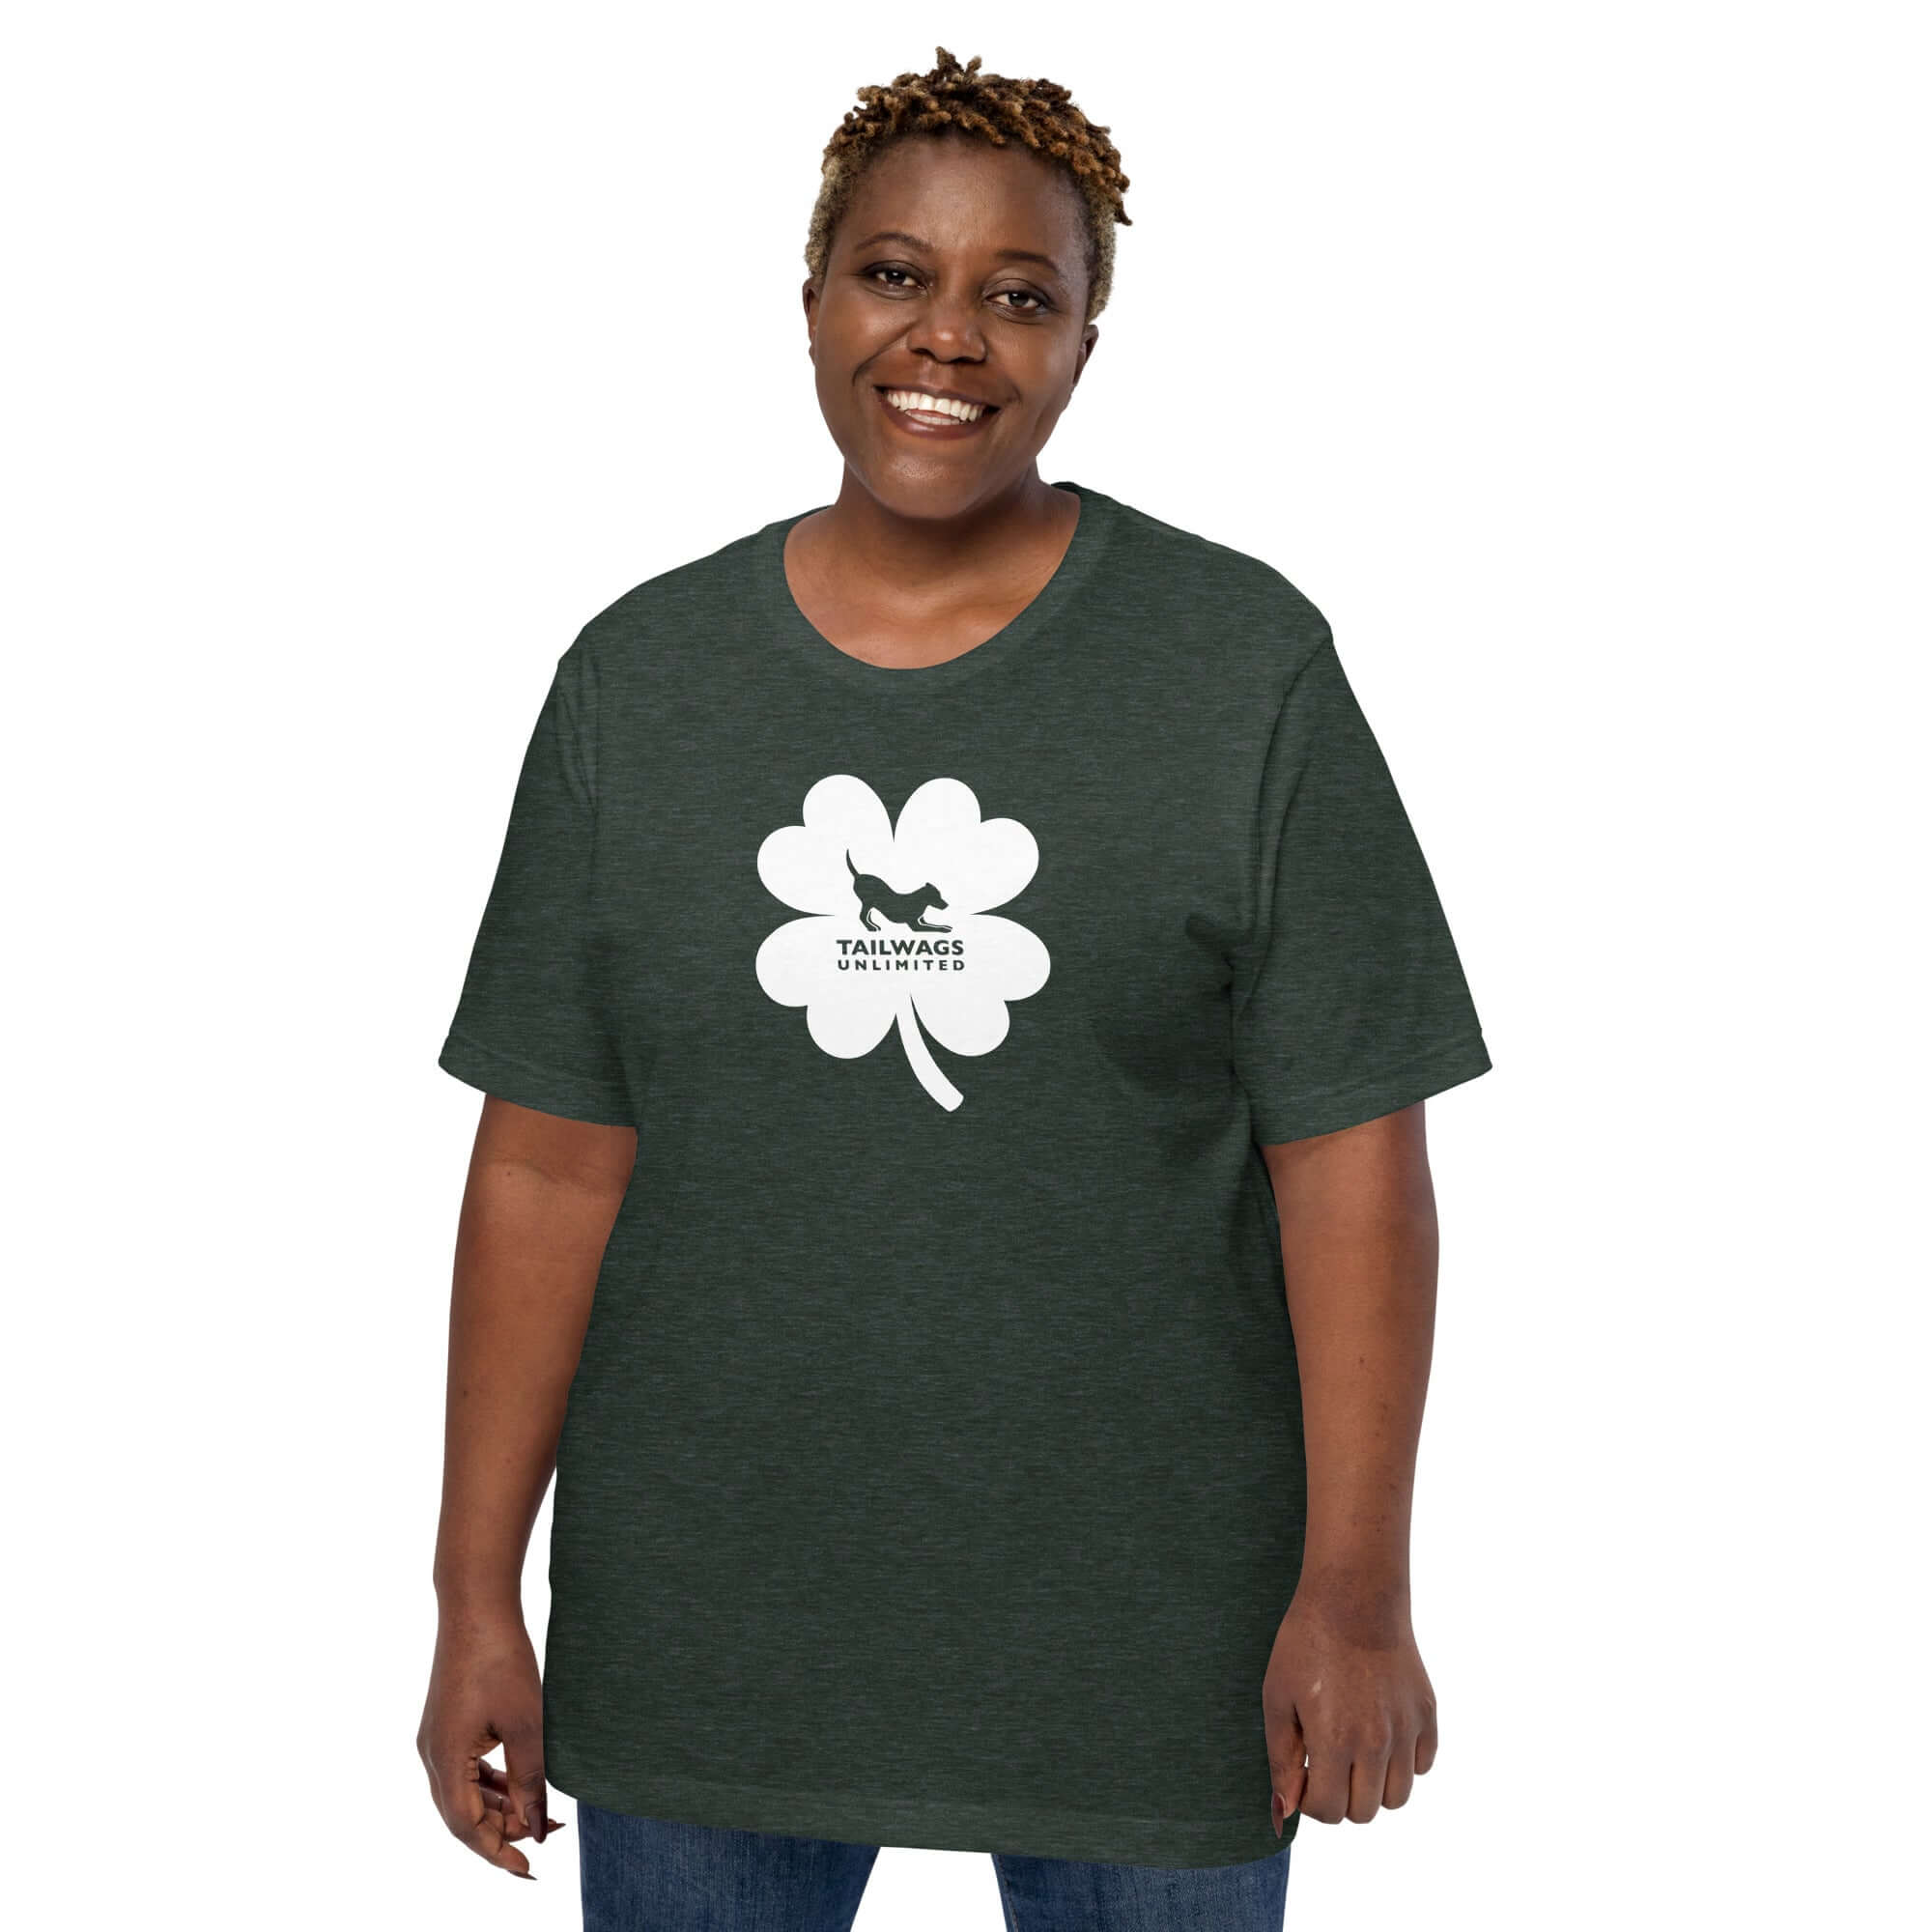 White Four Leaf Clover Logo T-Shirt - TAILWAGS UNLIMITED